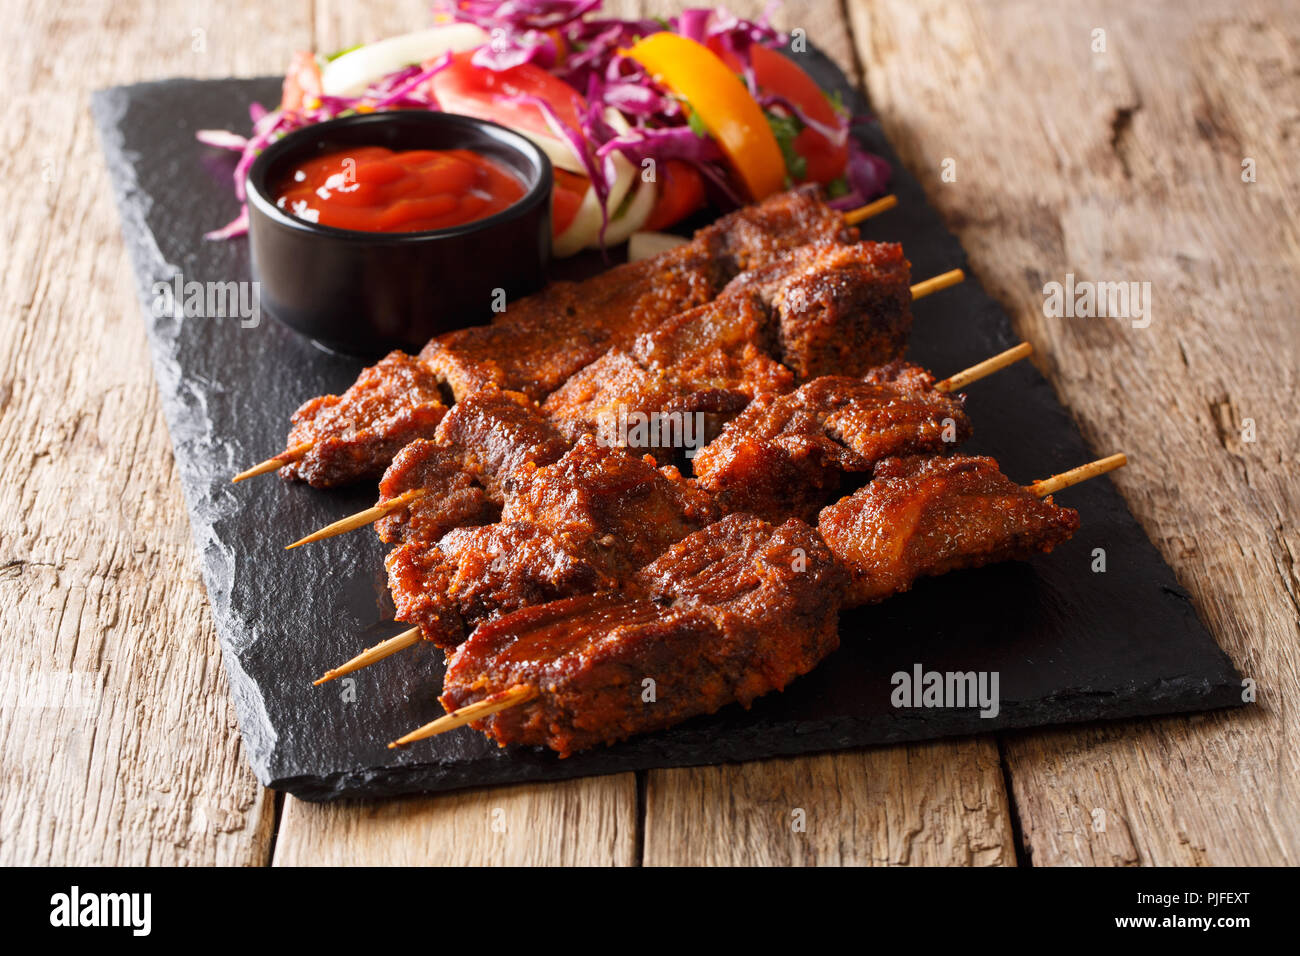 suya kebab with ground peanuts and spices with fresh vegetable salad and ketchup close-up on the table. horizontal Stock Photo